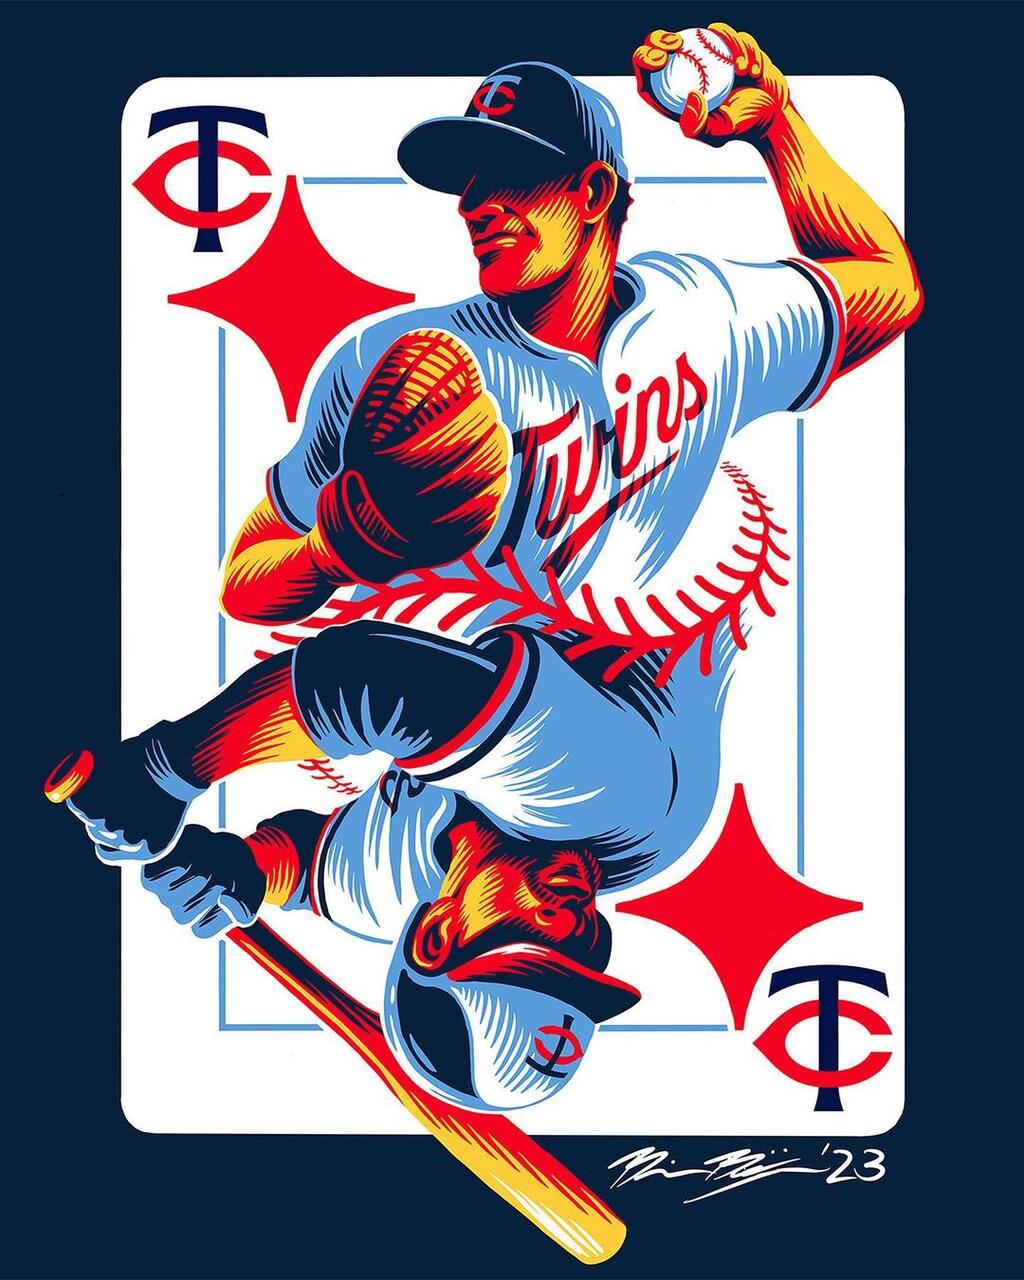 An image of a Minnesota Twins-styled card, with a pitcher and a batter on both ends.